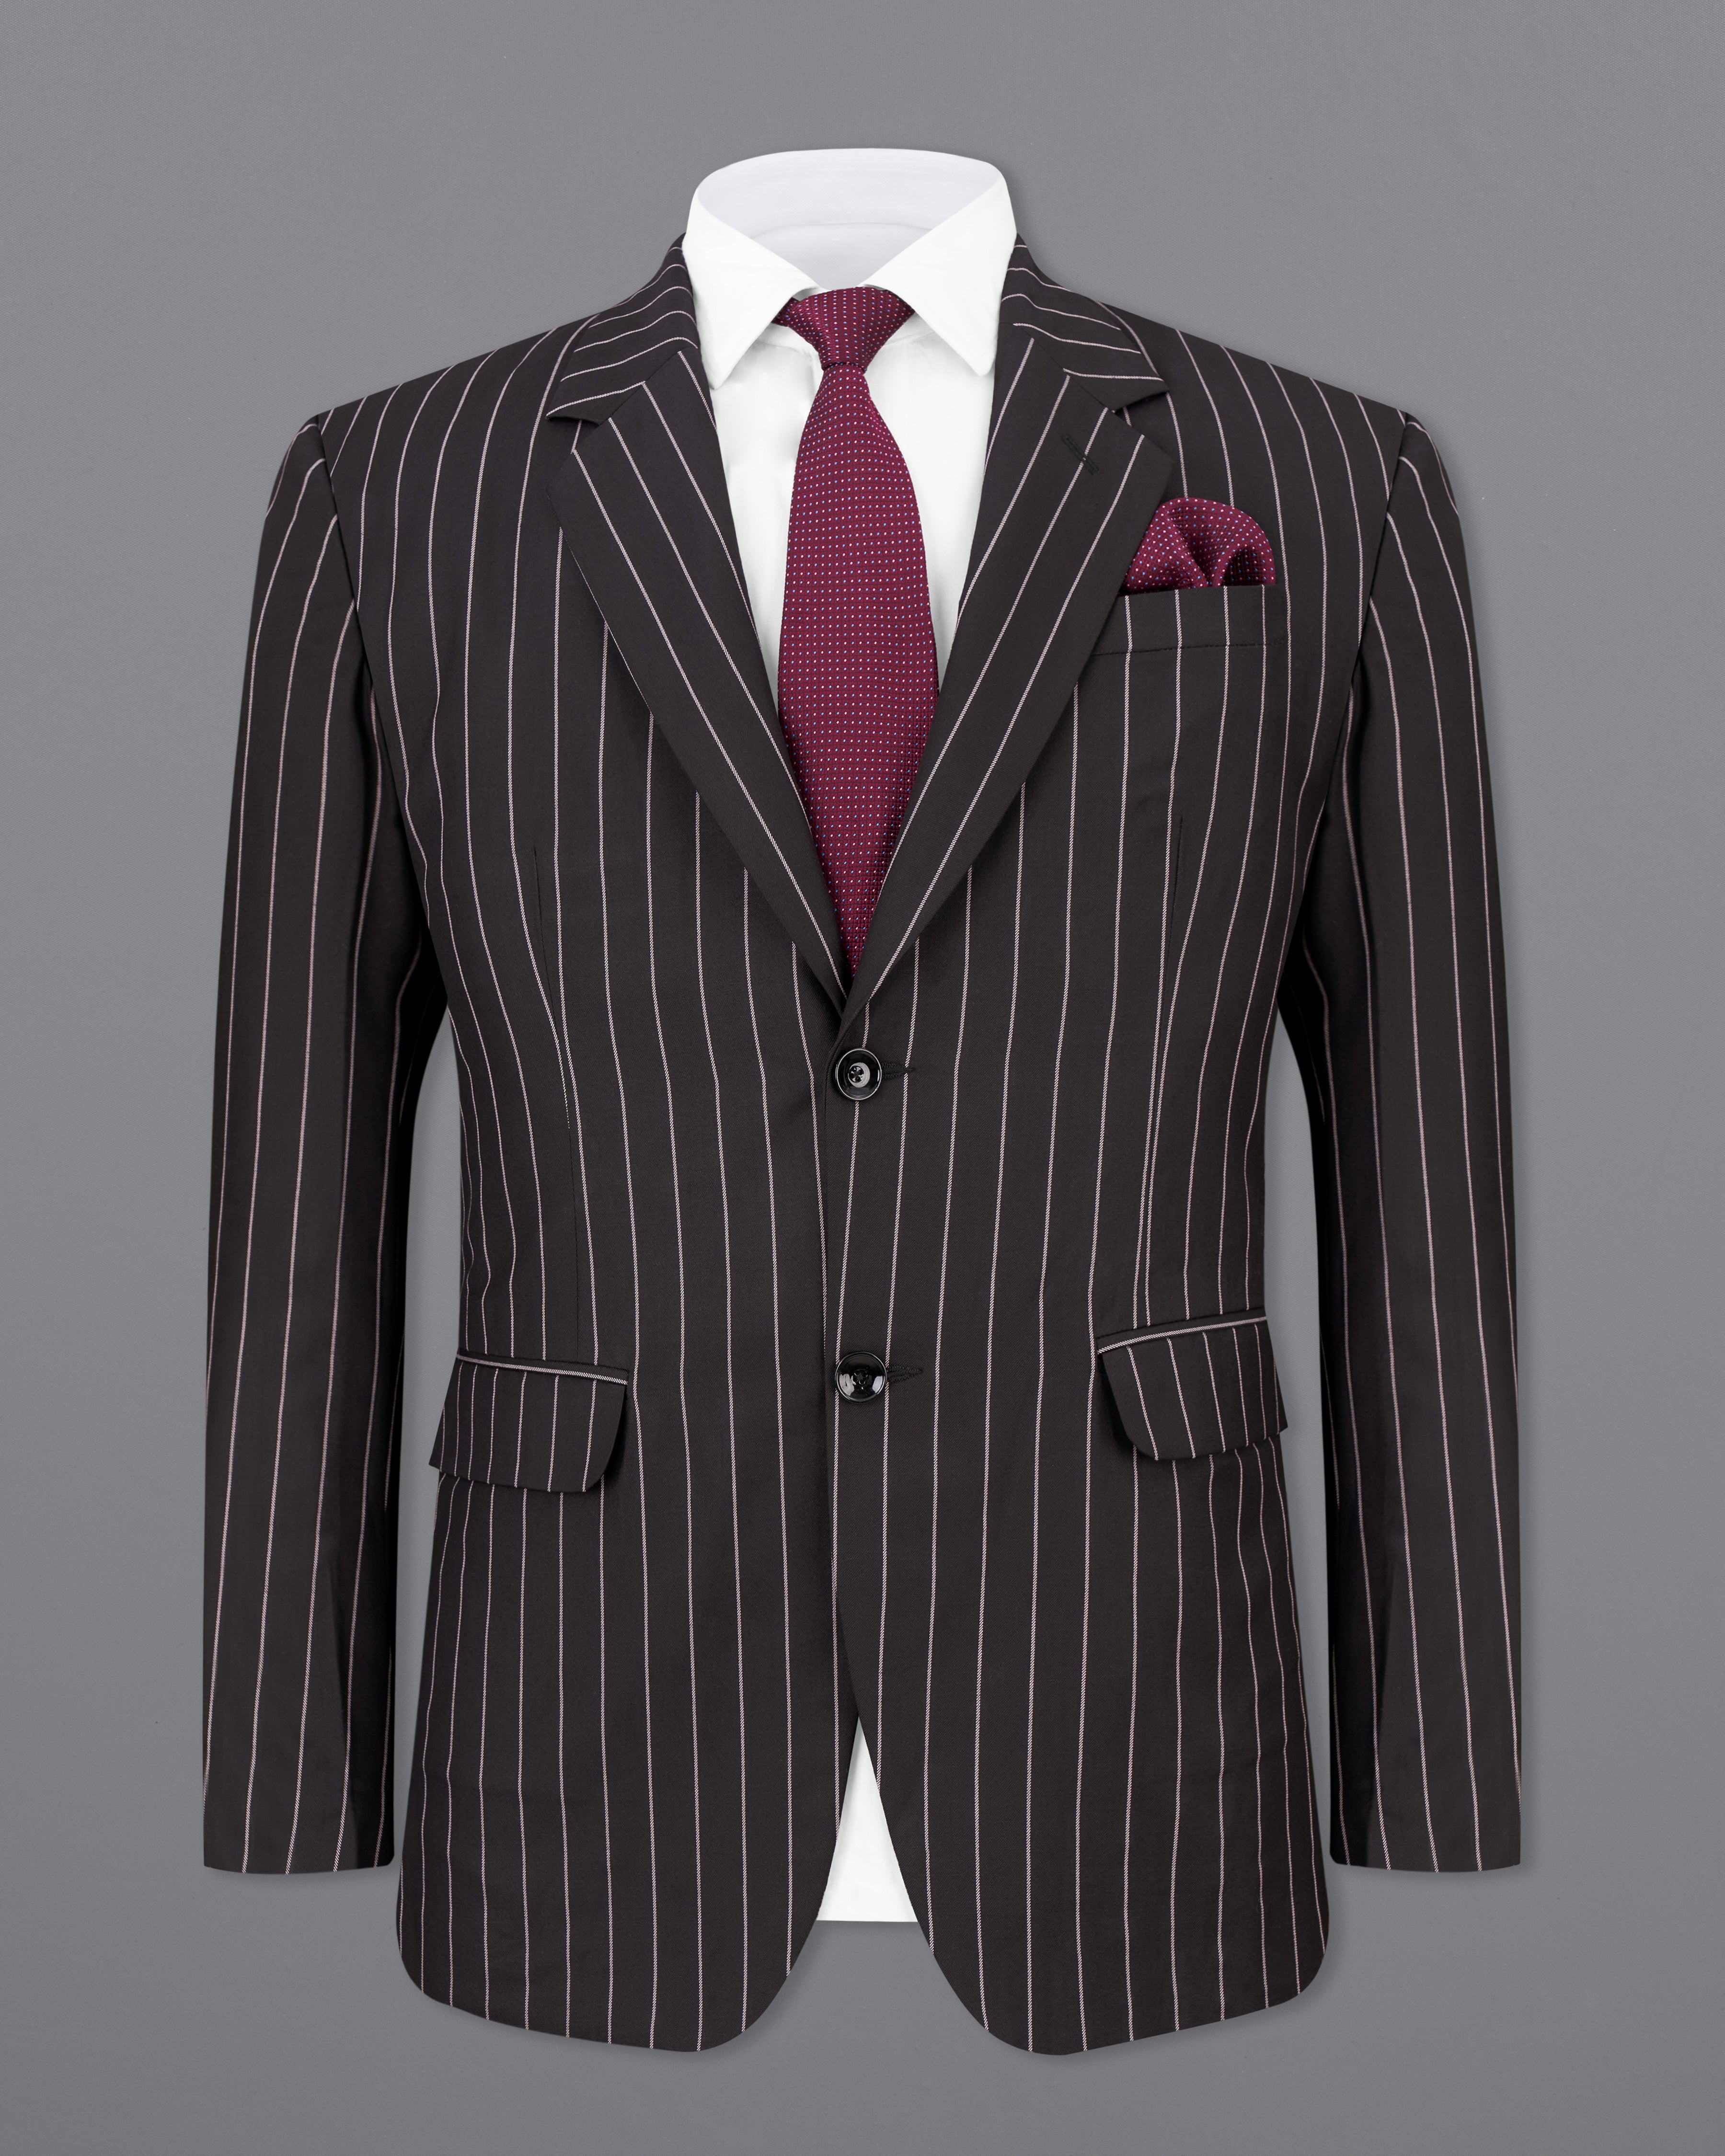 Birch Brown Striped Single Breasted Suit ST2498-SB-36, ST2498-SB-38, ST2498-SB-40, ST2498-SB-42, ST2498-SB-44, ST2498-SB-46, ST2498-SB-48, ST2498-SB-50, ST2498-SB-52, ST2498-SB-54, ST2498-SB-56, ST2498-SB-58, ST2498-SB-60